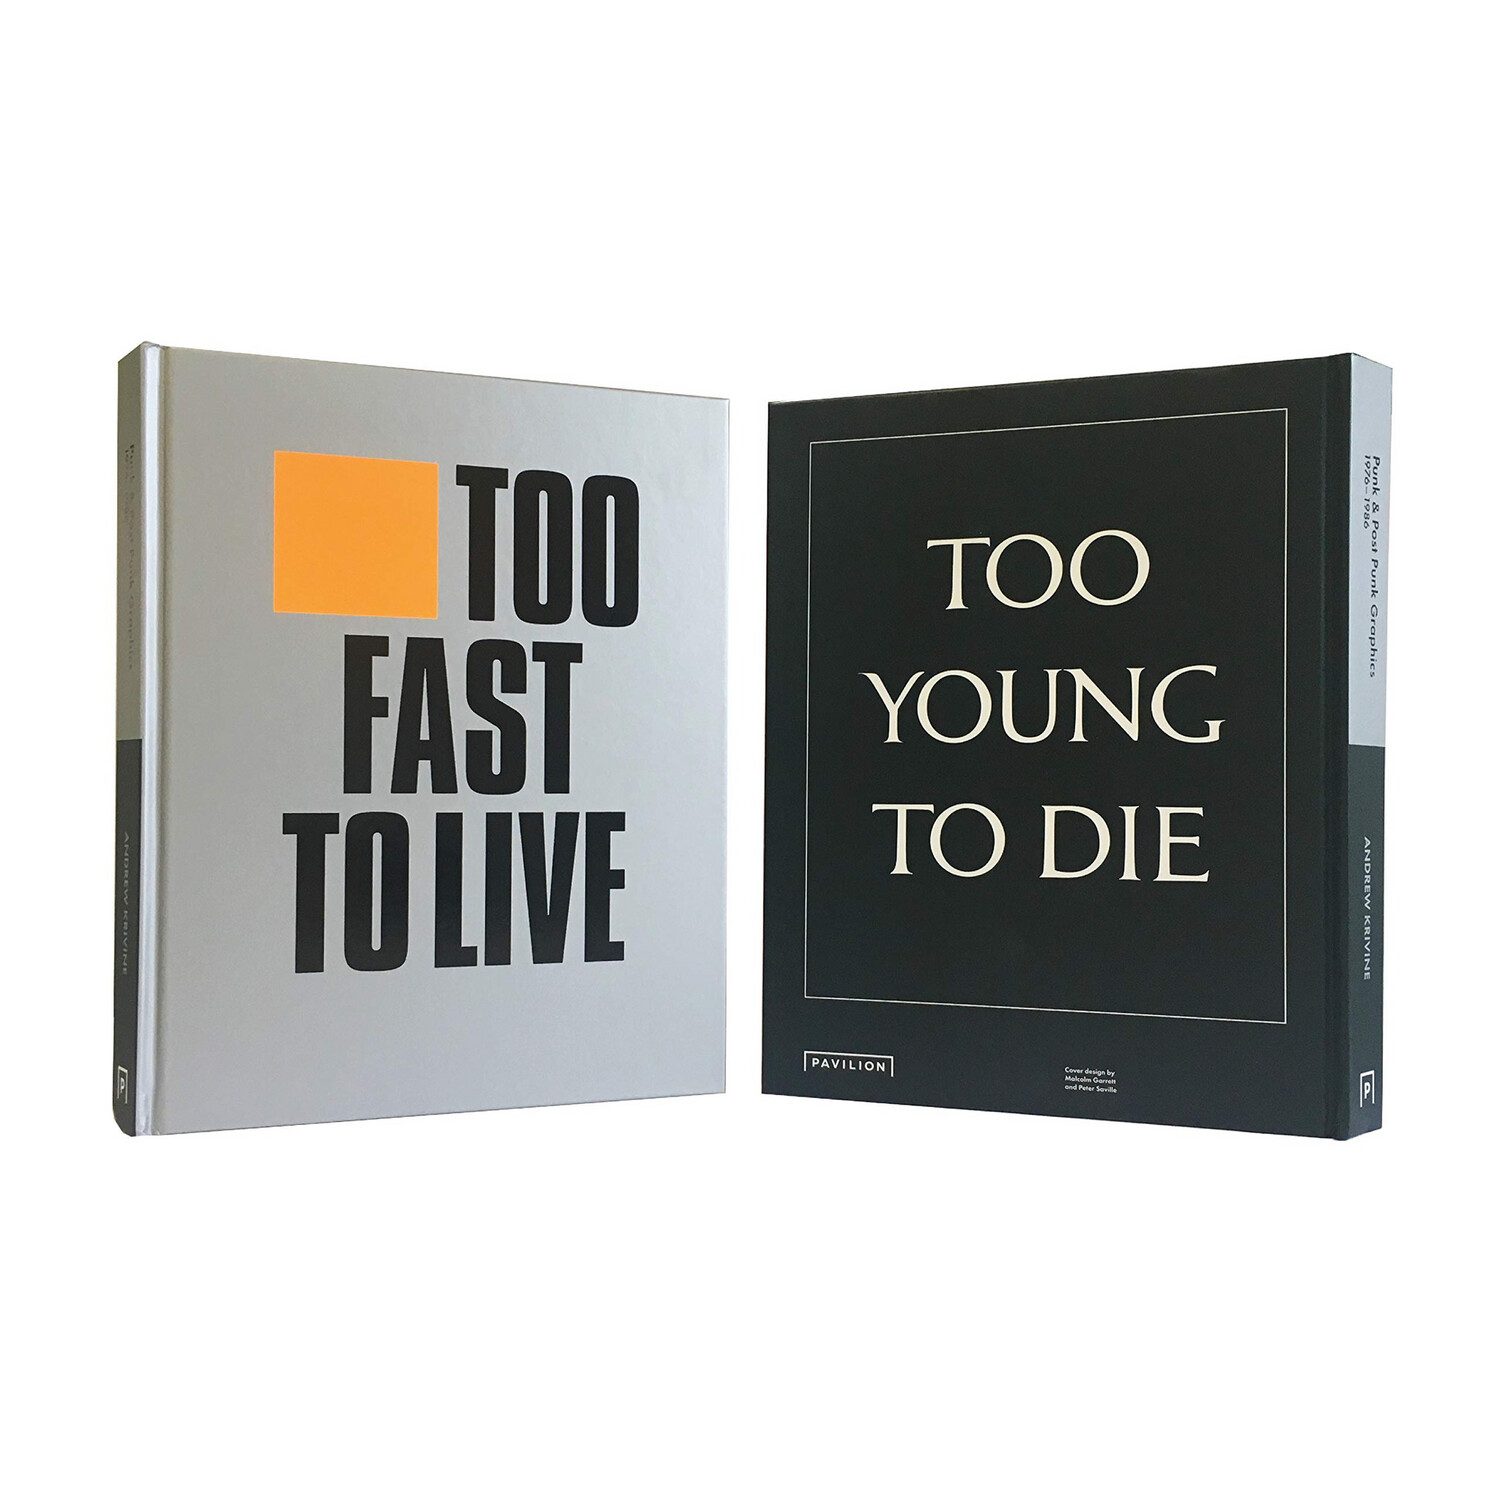 Too Fast To Live By Andrew Krivine - Punk & Post Punk Graphics